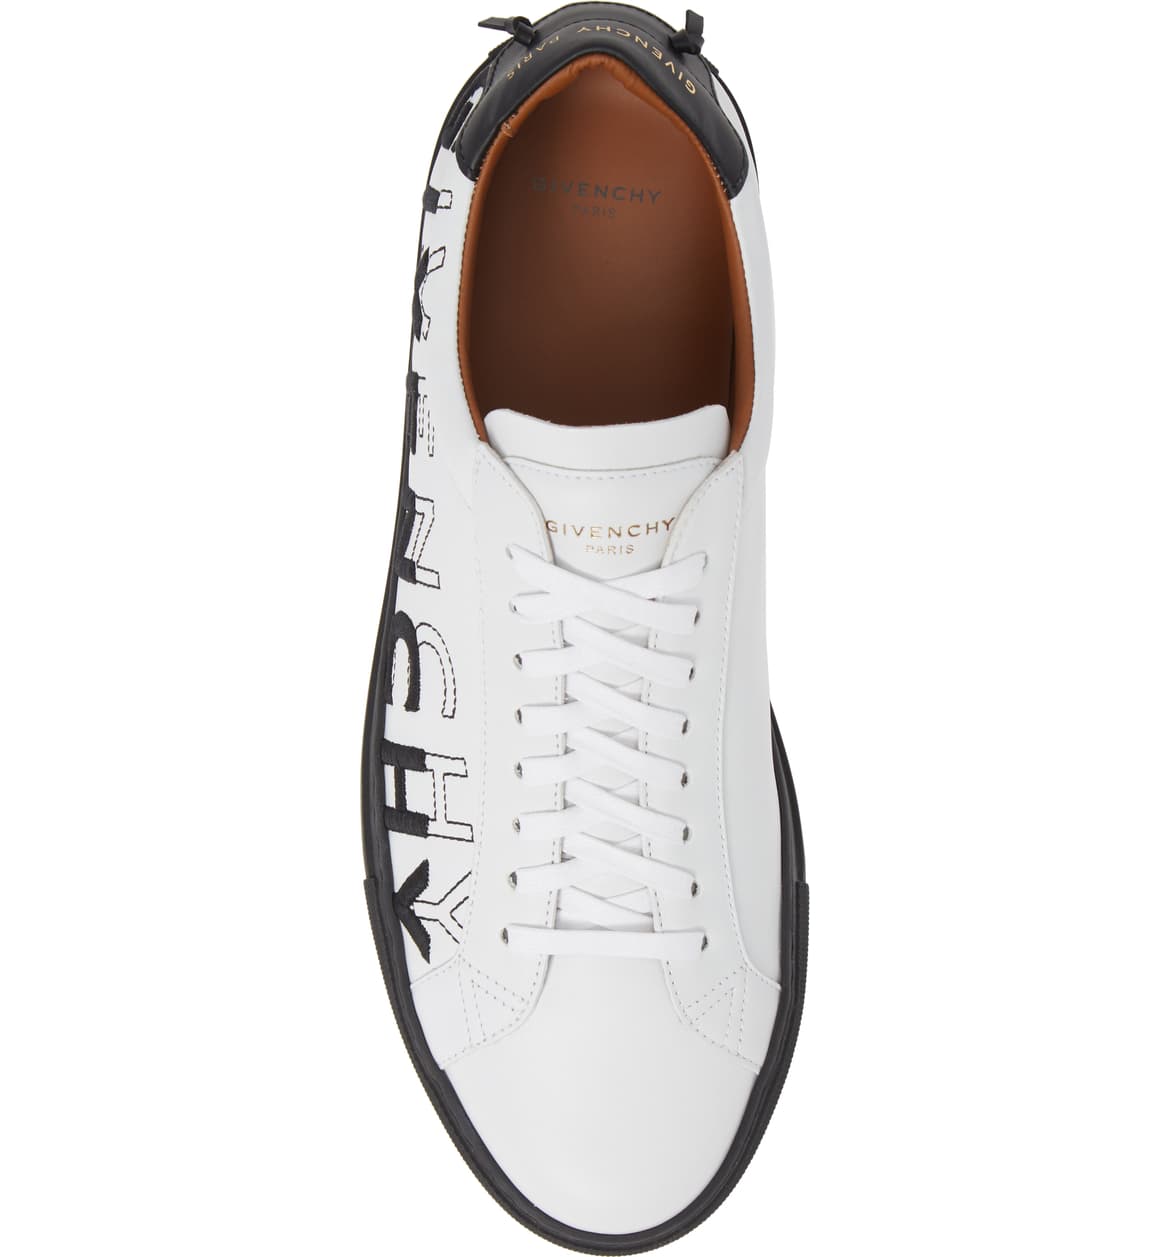 City Sport leather sneakers in black - Givenchy | Mytheresa